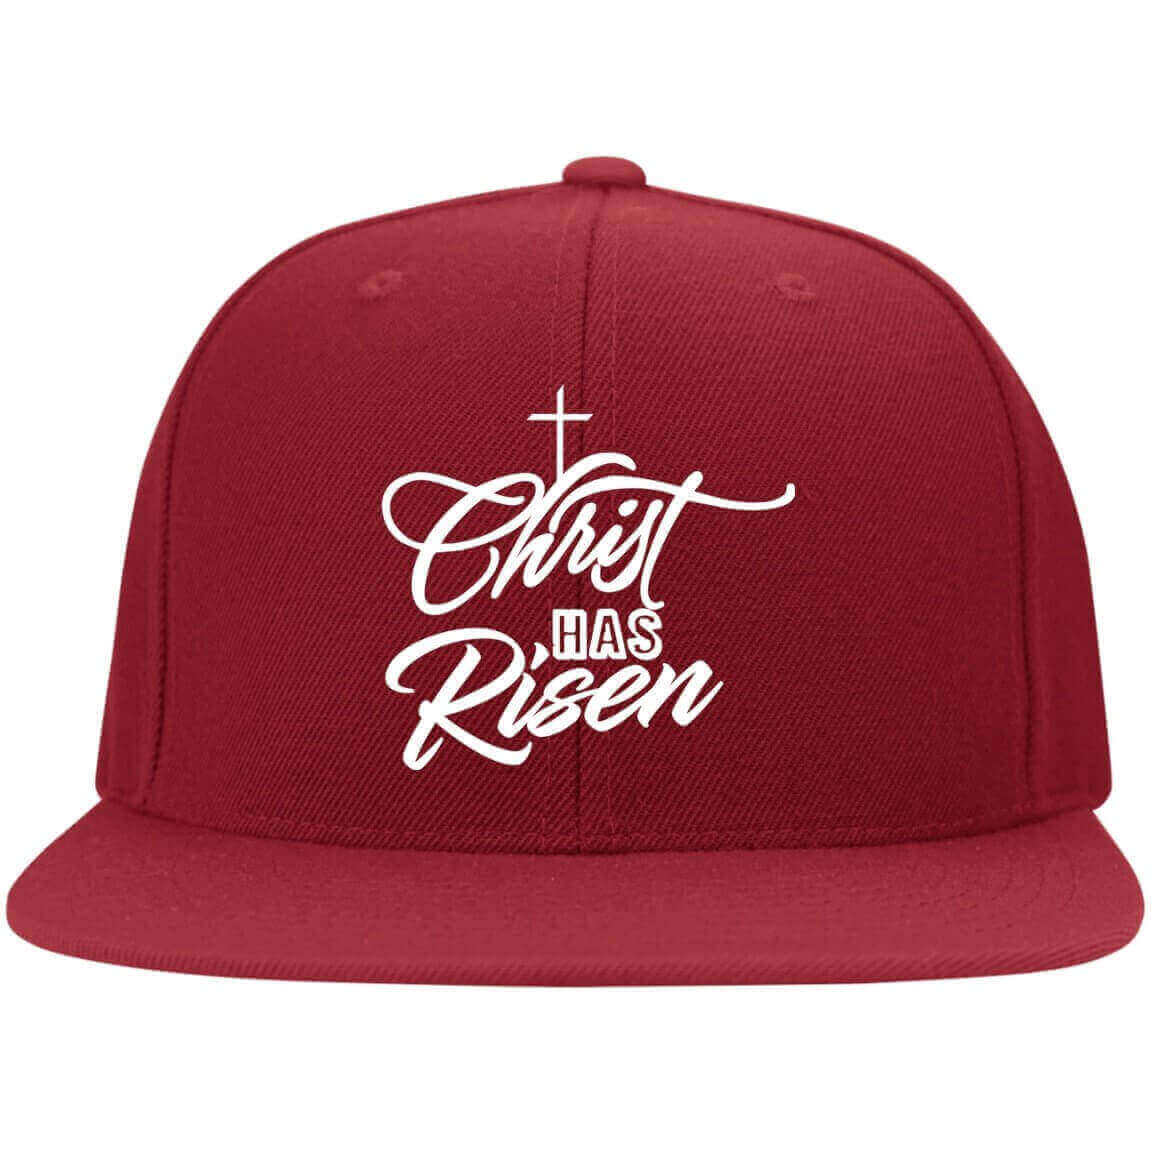 Christ Has Risen Embroidered Fitted Cap